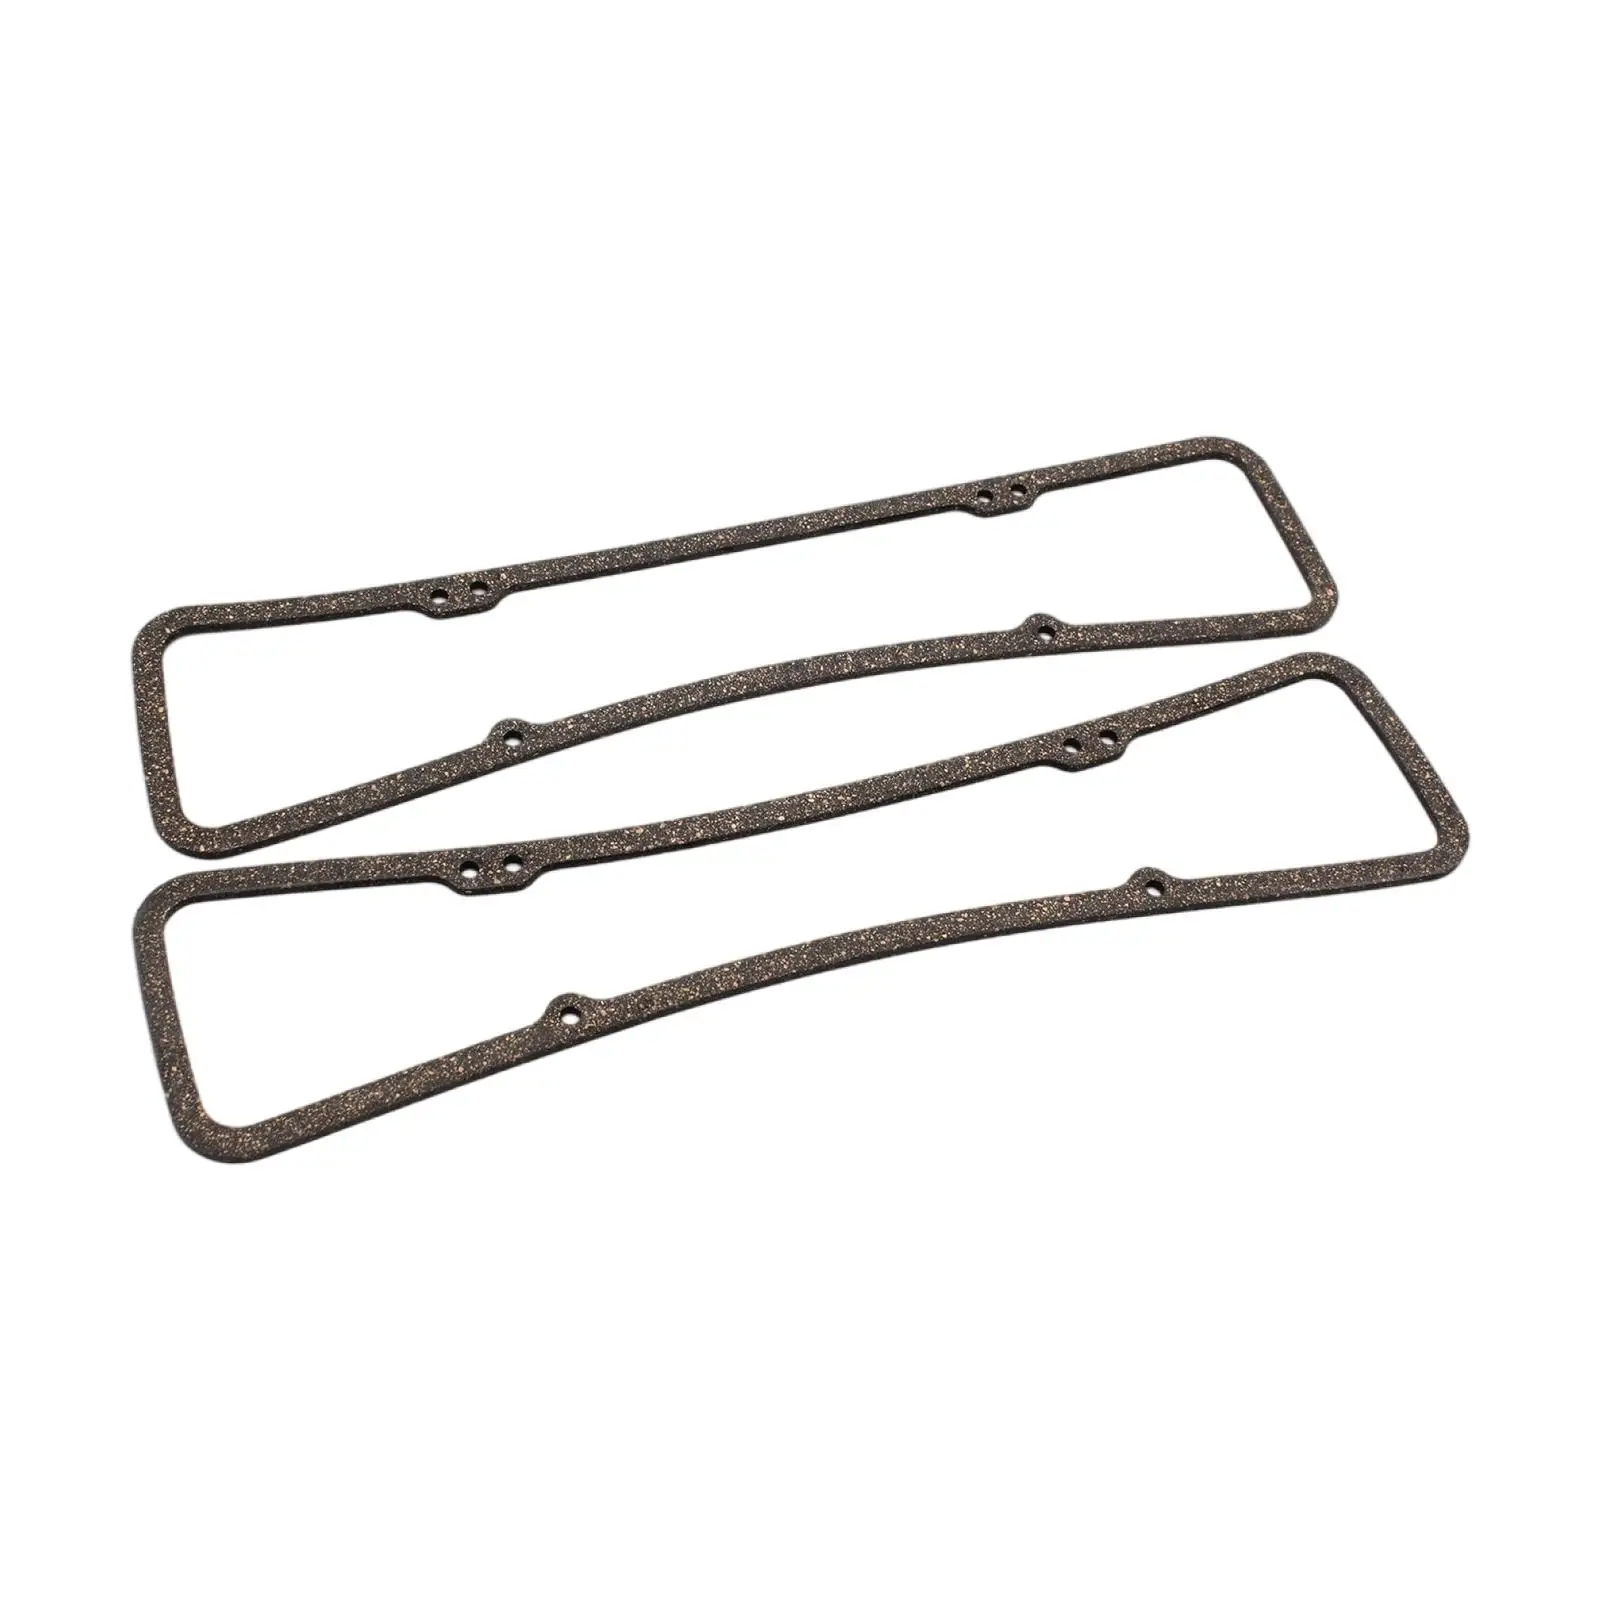 Valve Cover Gaskets Set 7483 2x for 305 327 350 383 400 Engines